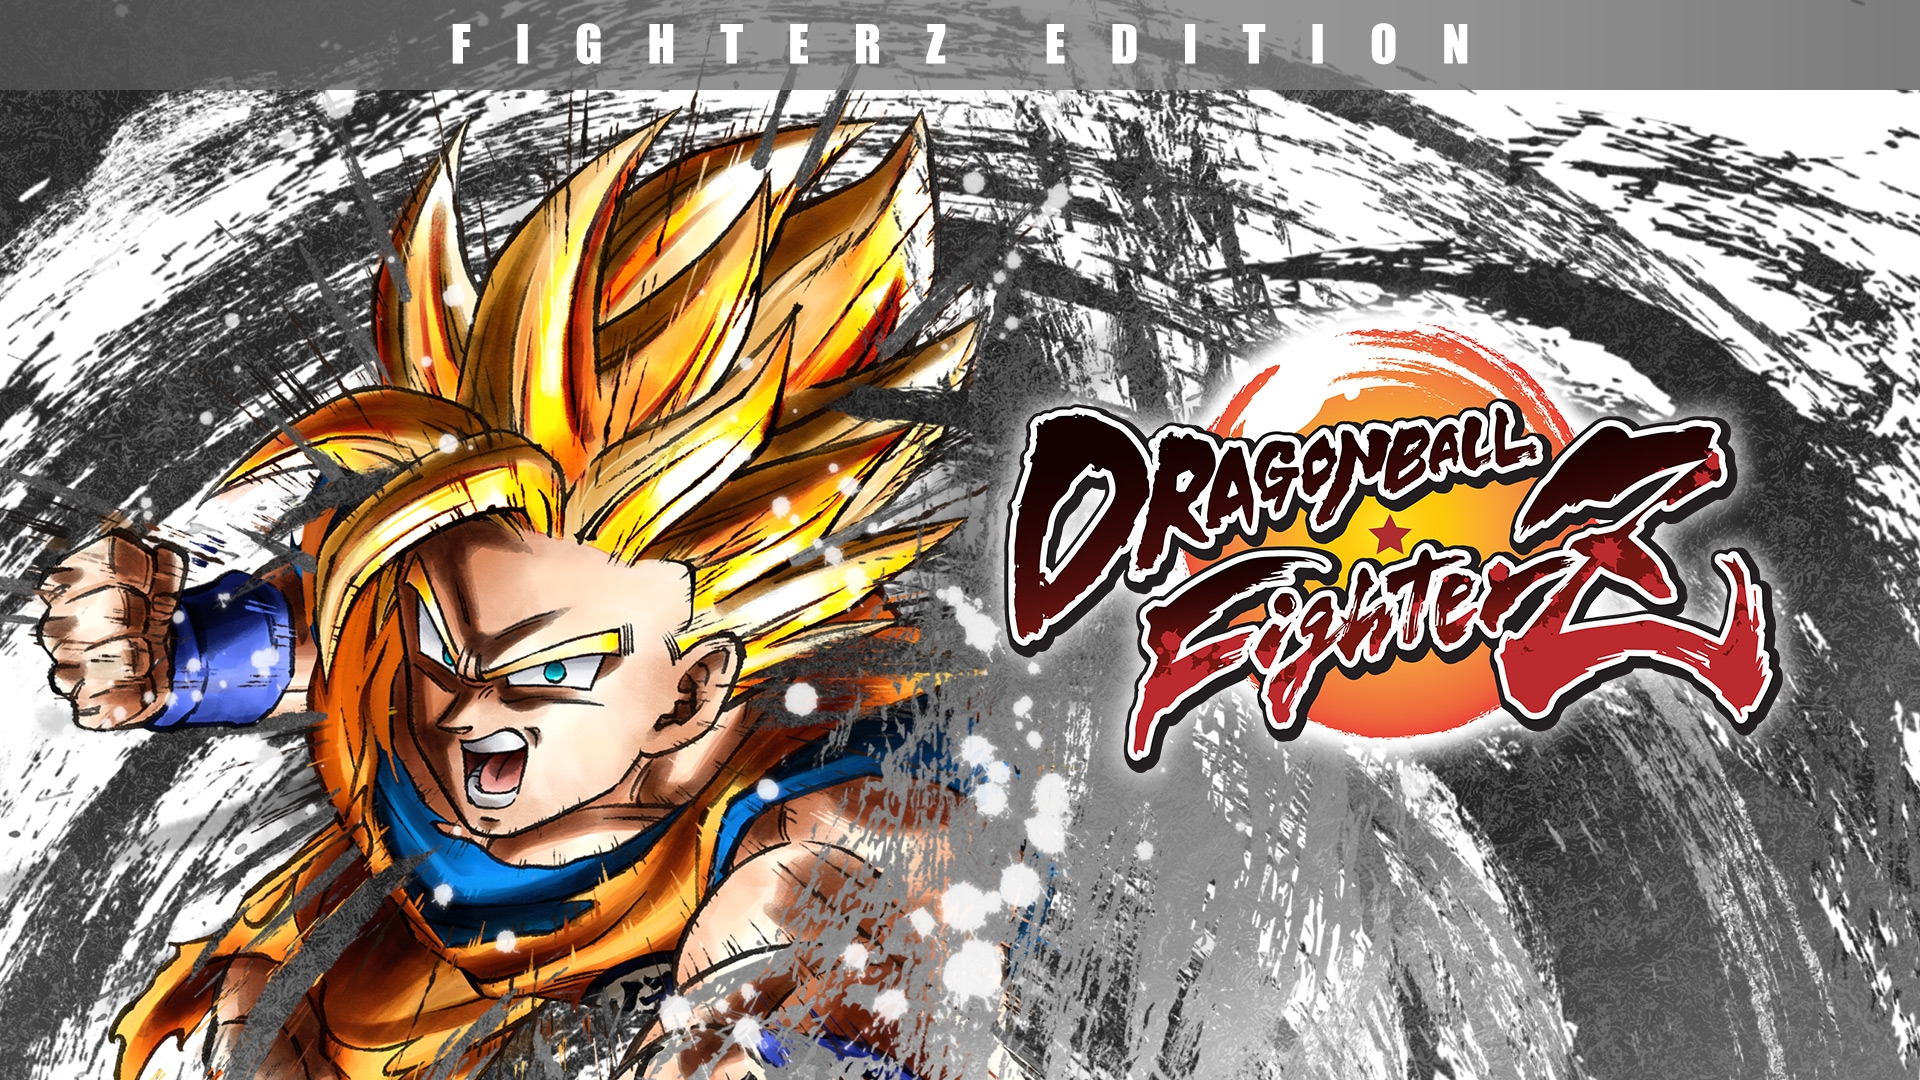 DRAGON BALL: THE BREAKERS Special Edition - Microsoft Xbox One for